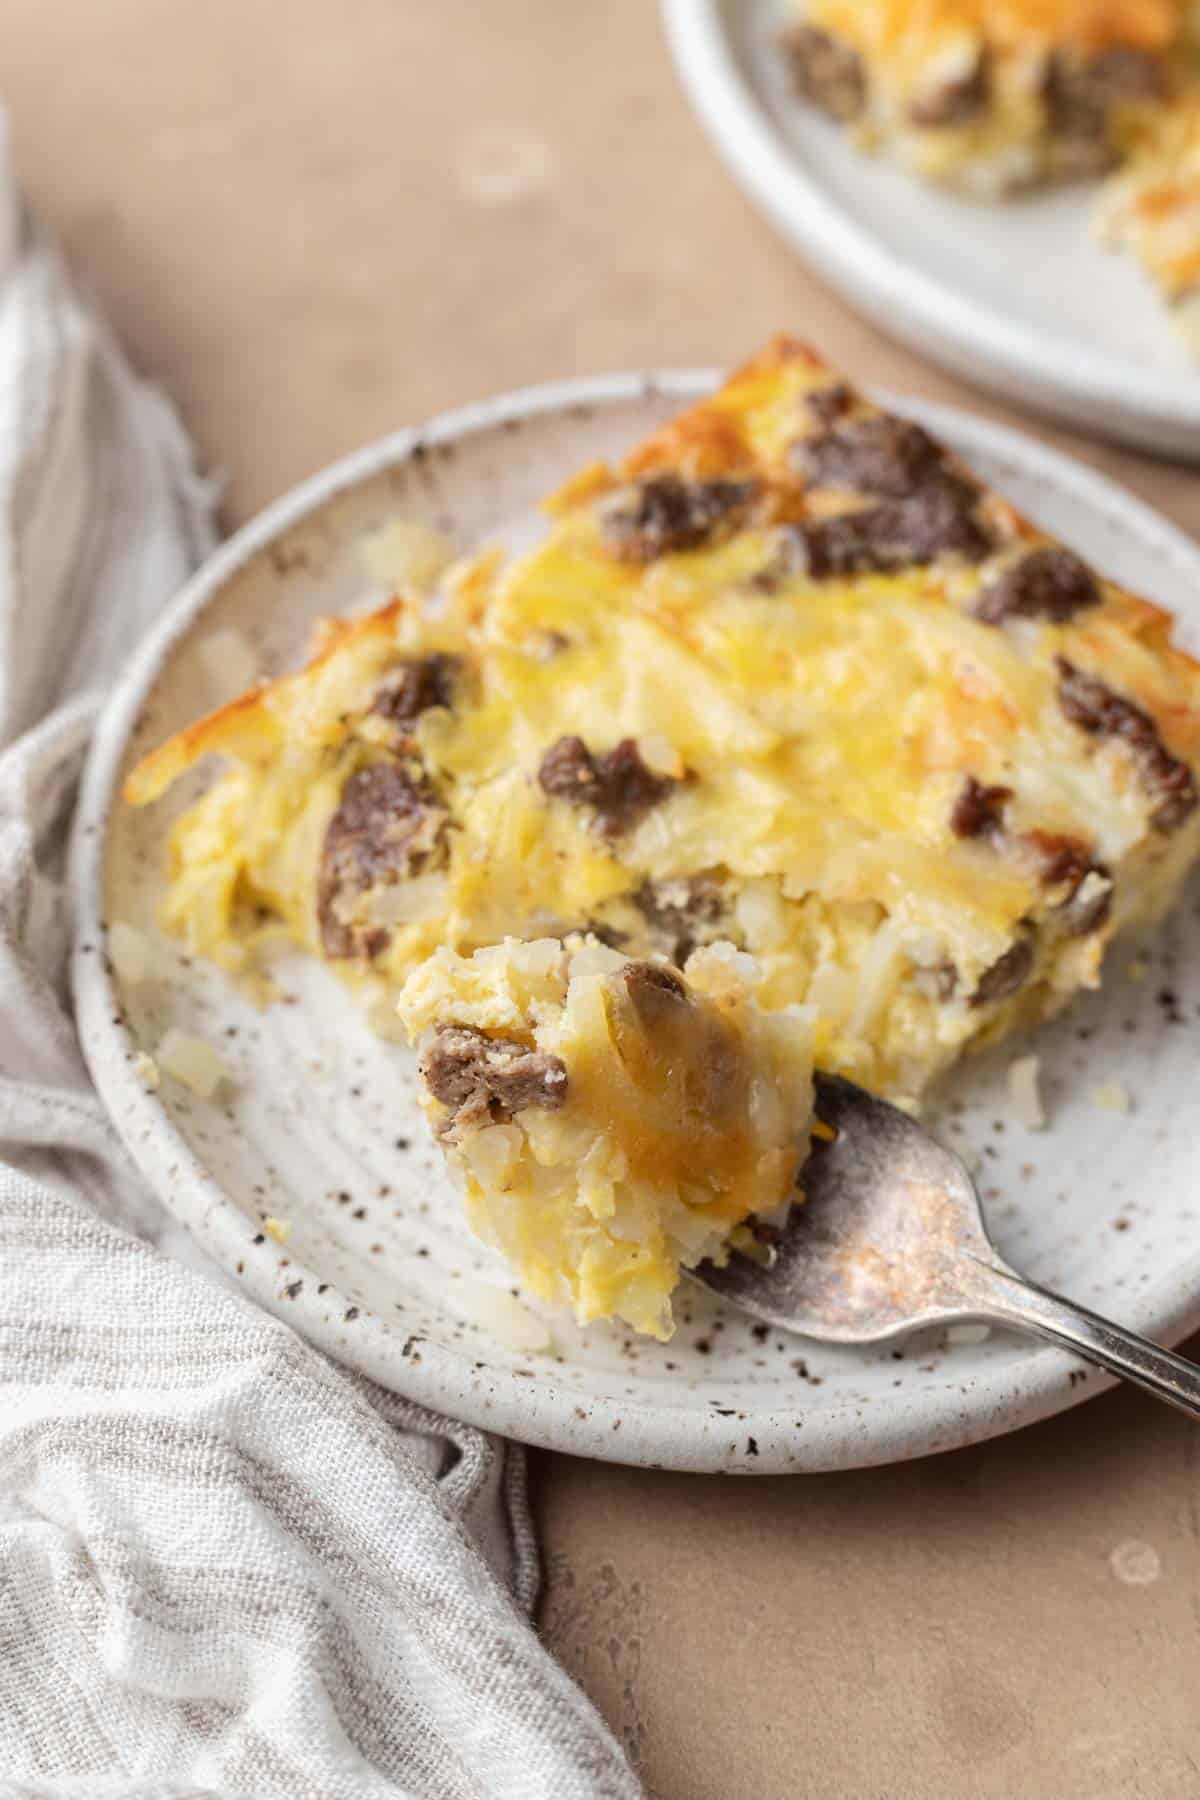 Slice of Dairy-Free Breakfast Casserole that is resting on a plate and ready to be eaten.